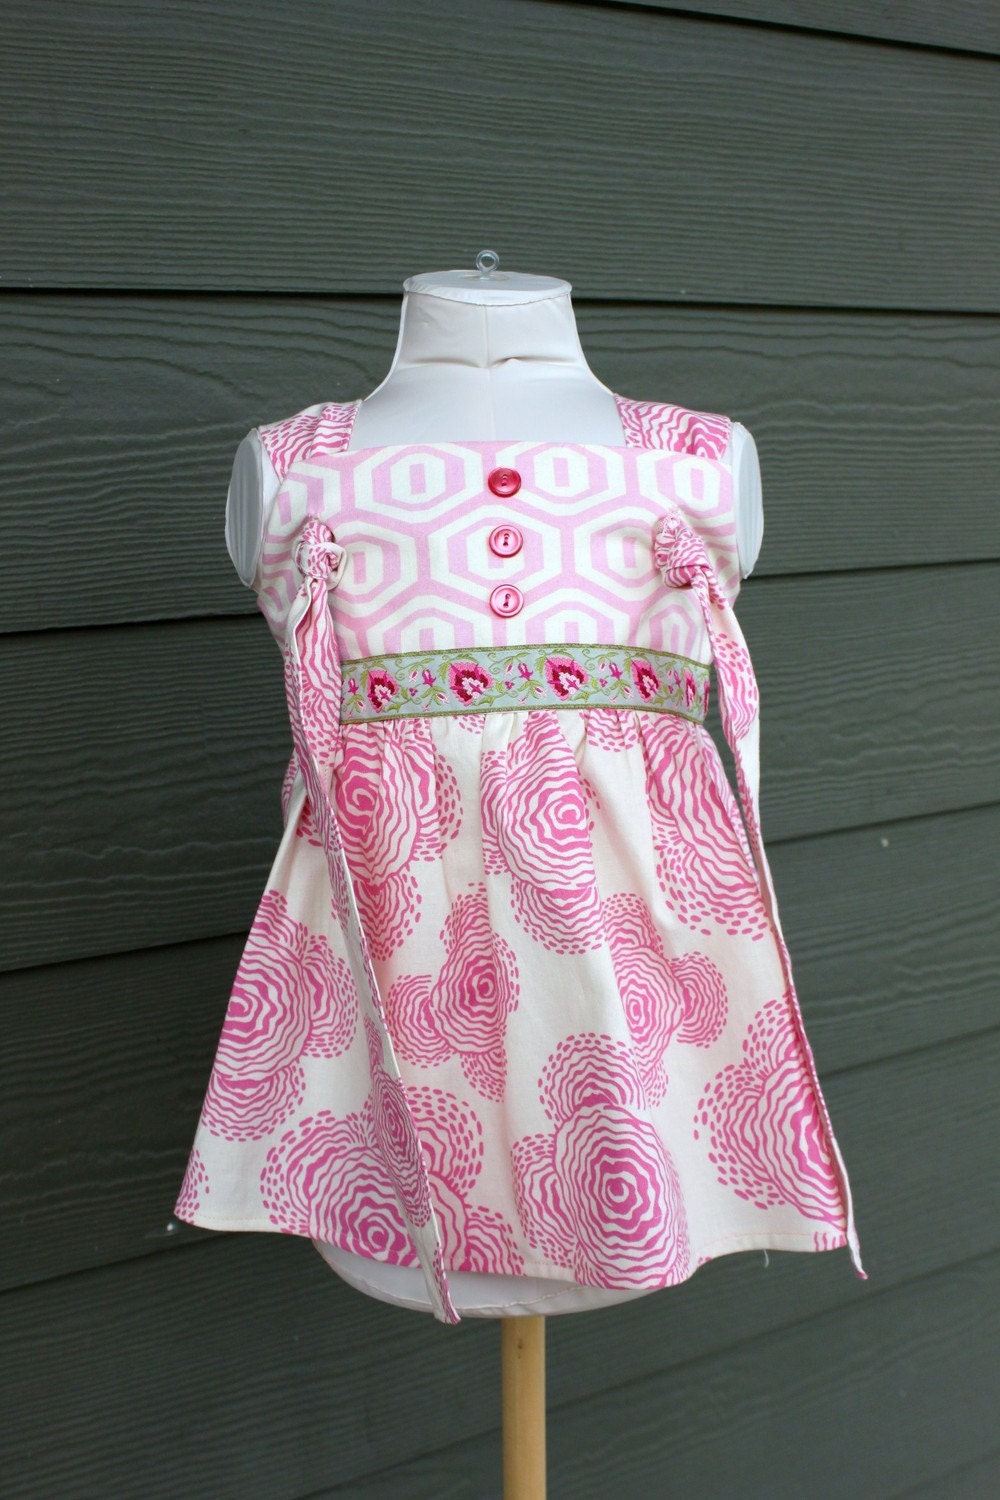 Boutique Knot  Top, size 12mo to 6yrs